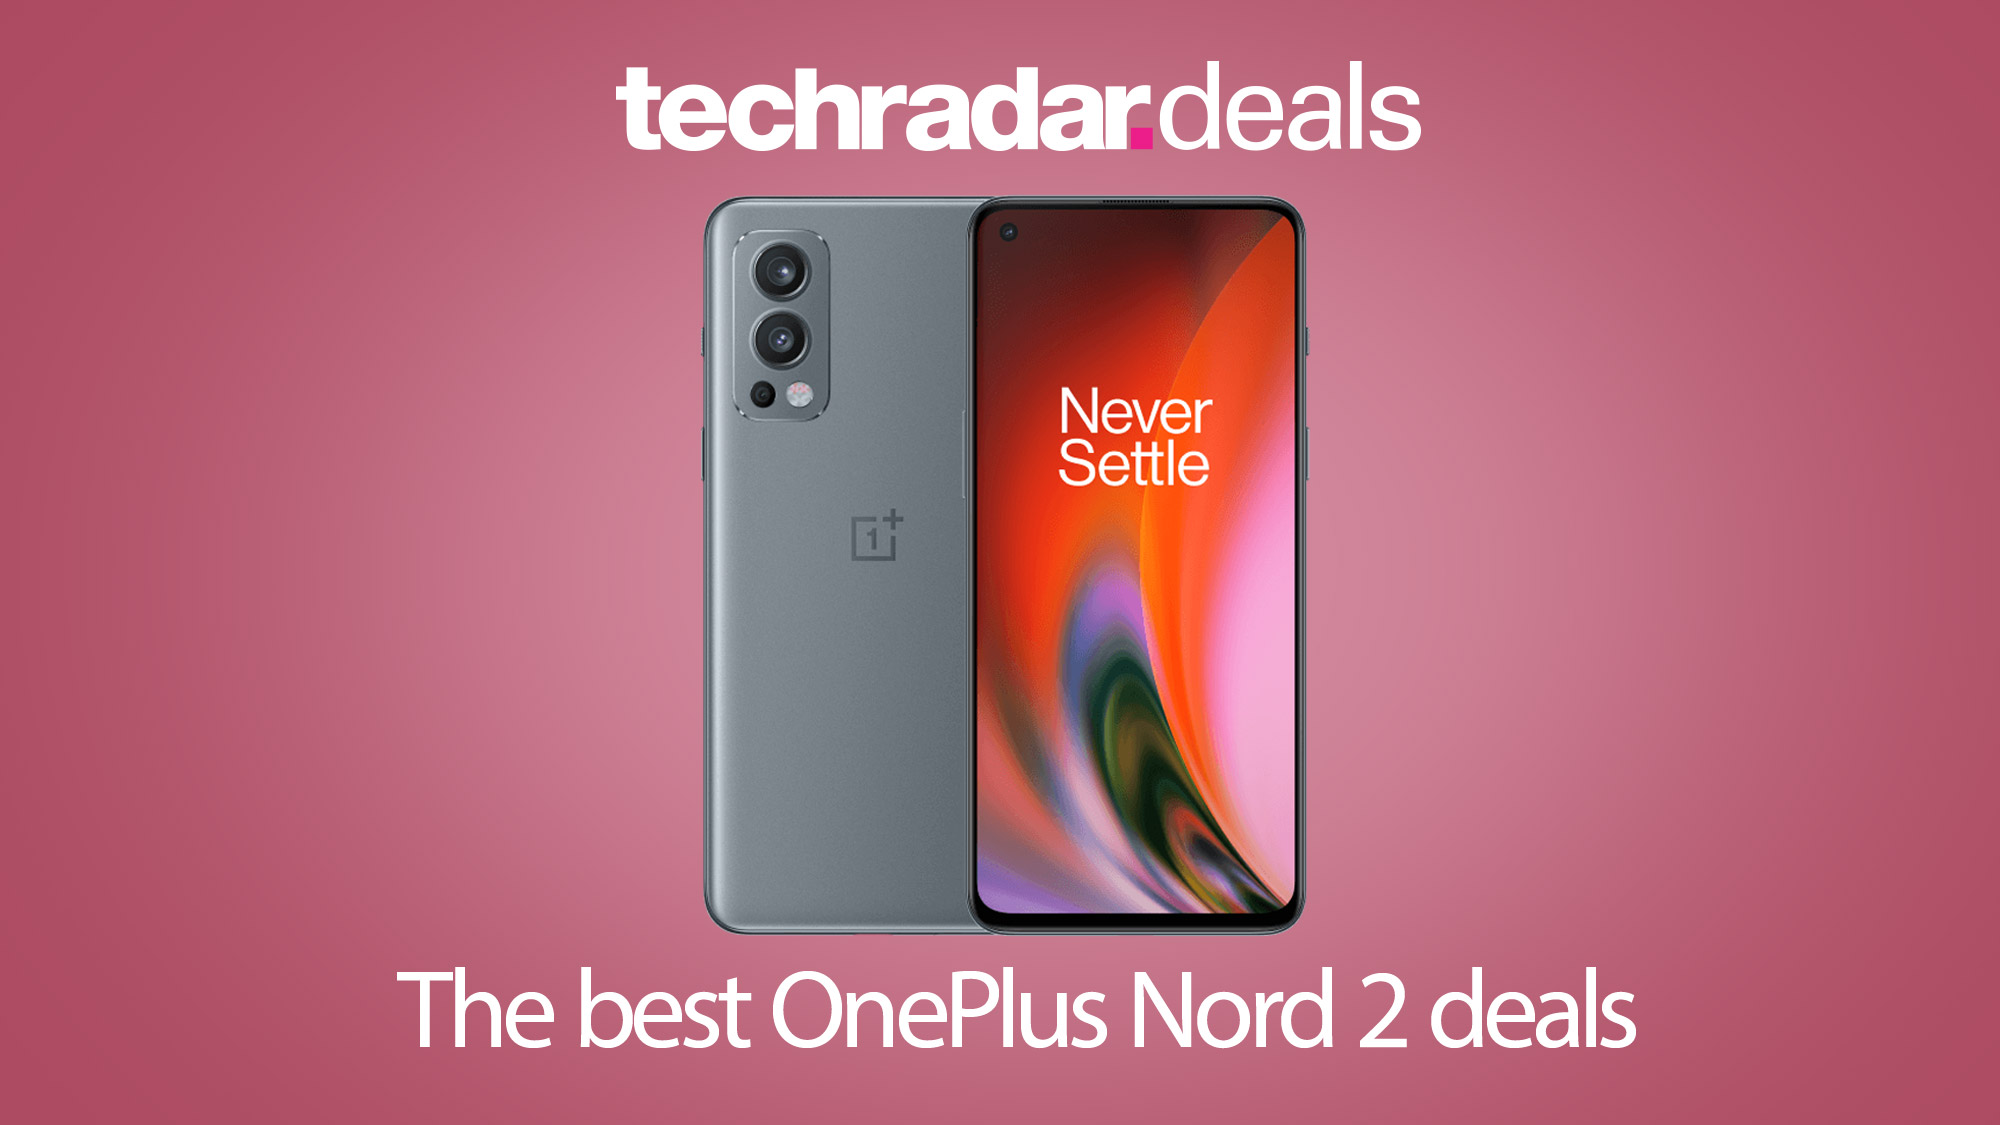 OnePlus Nord 2: Price, specs and best deals